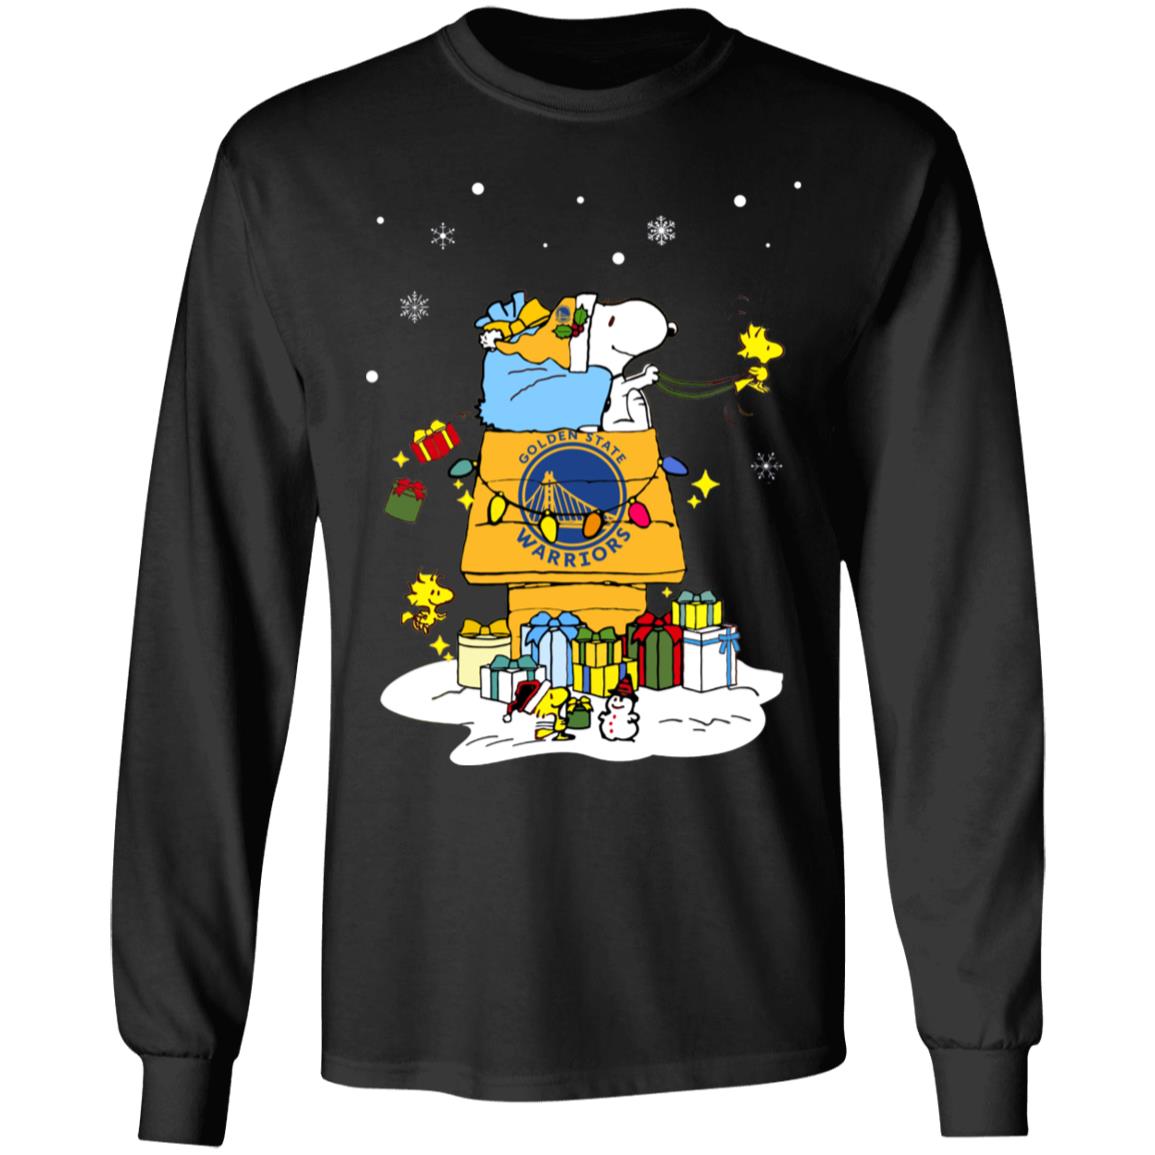 Golden State Warriors Christmas Whiteout Game Giveaway T- Shirt. Size XL., #1758083548